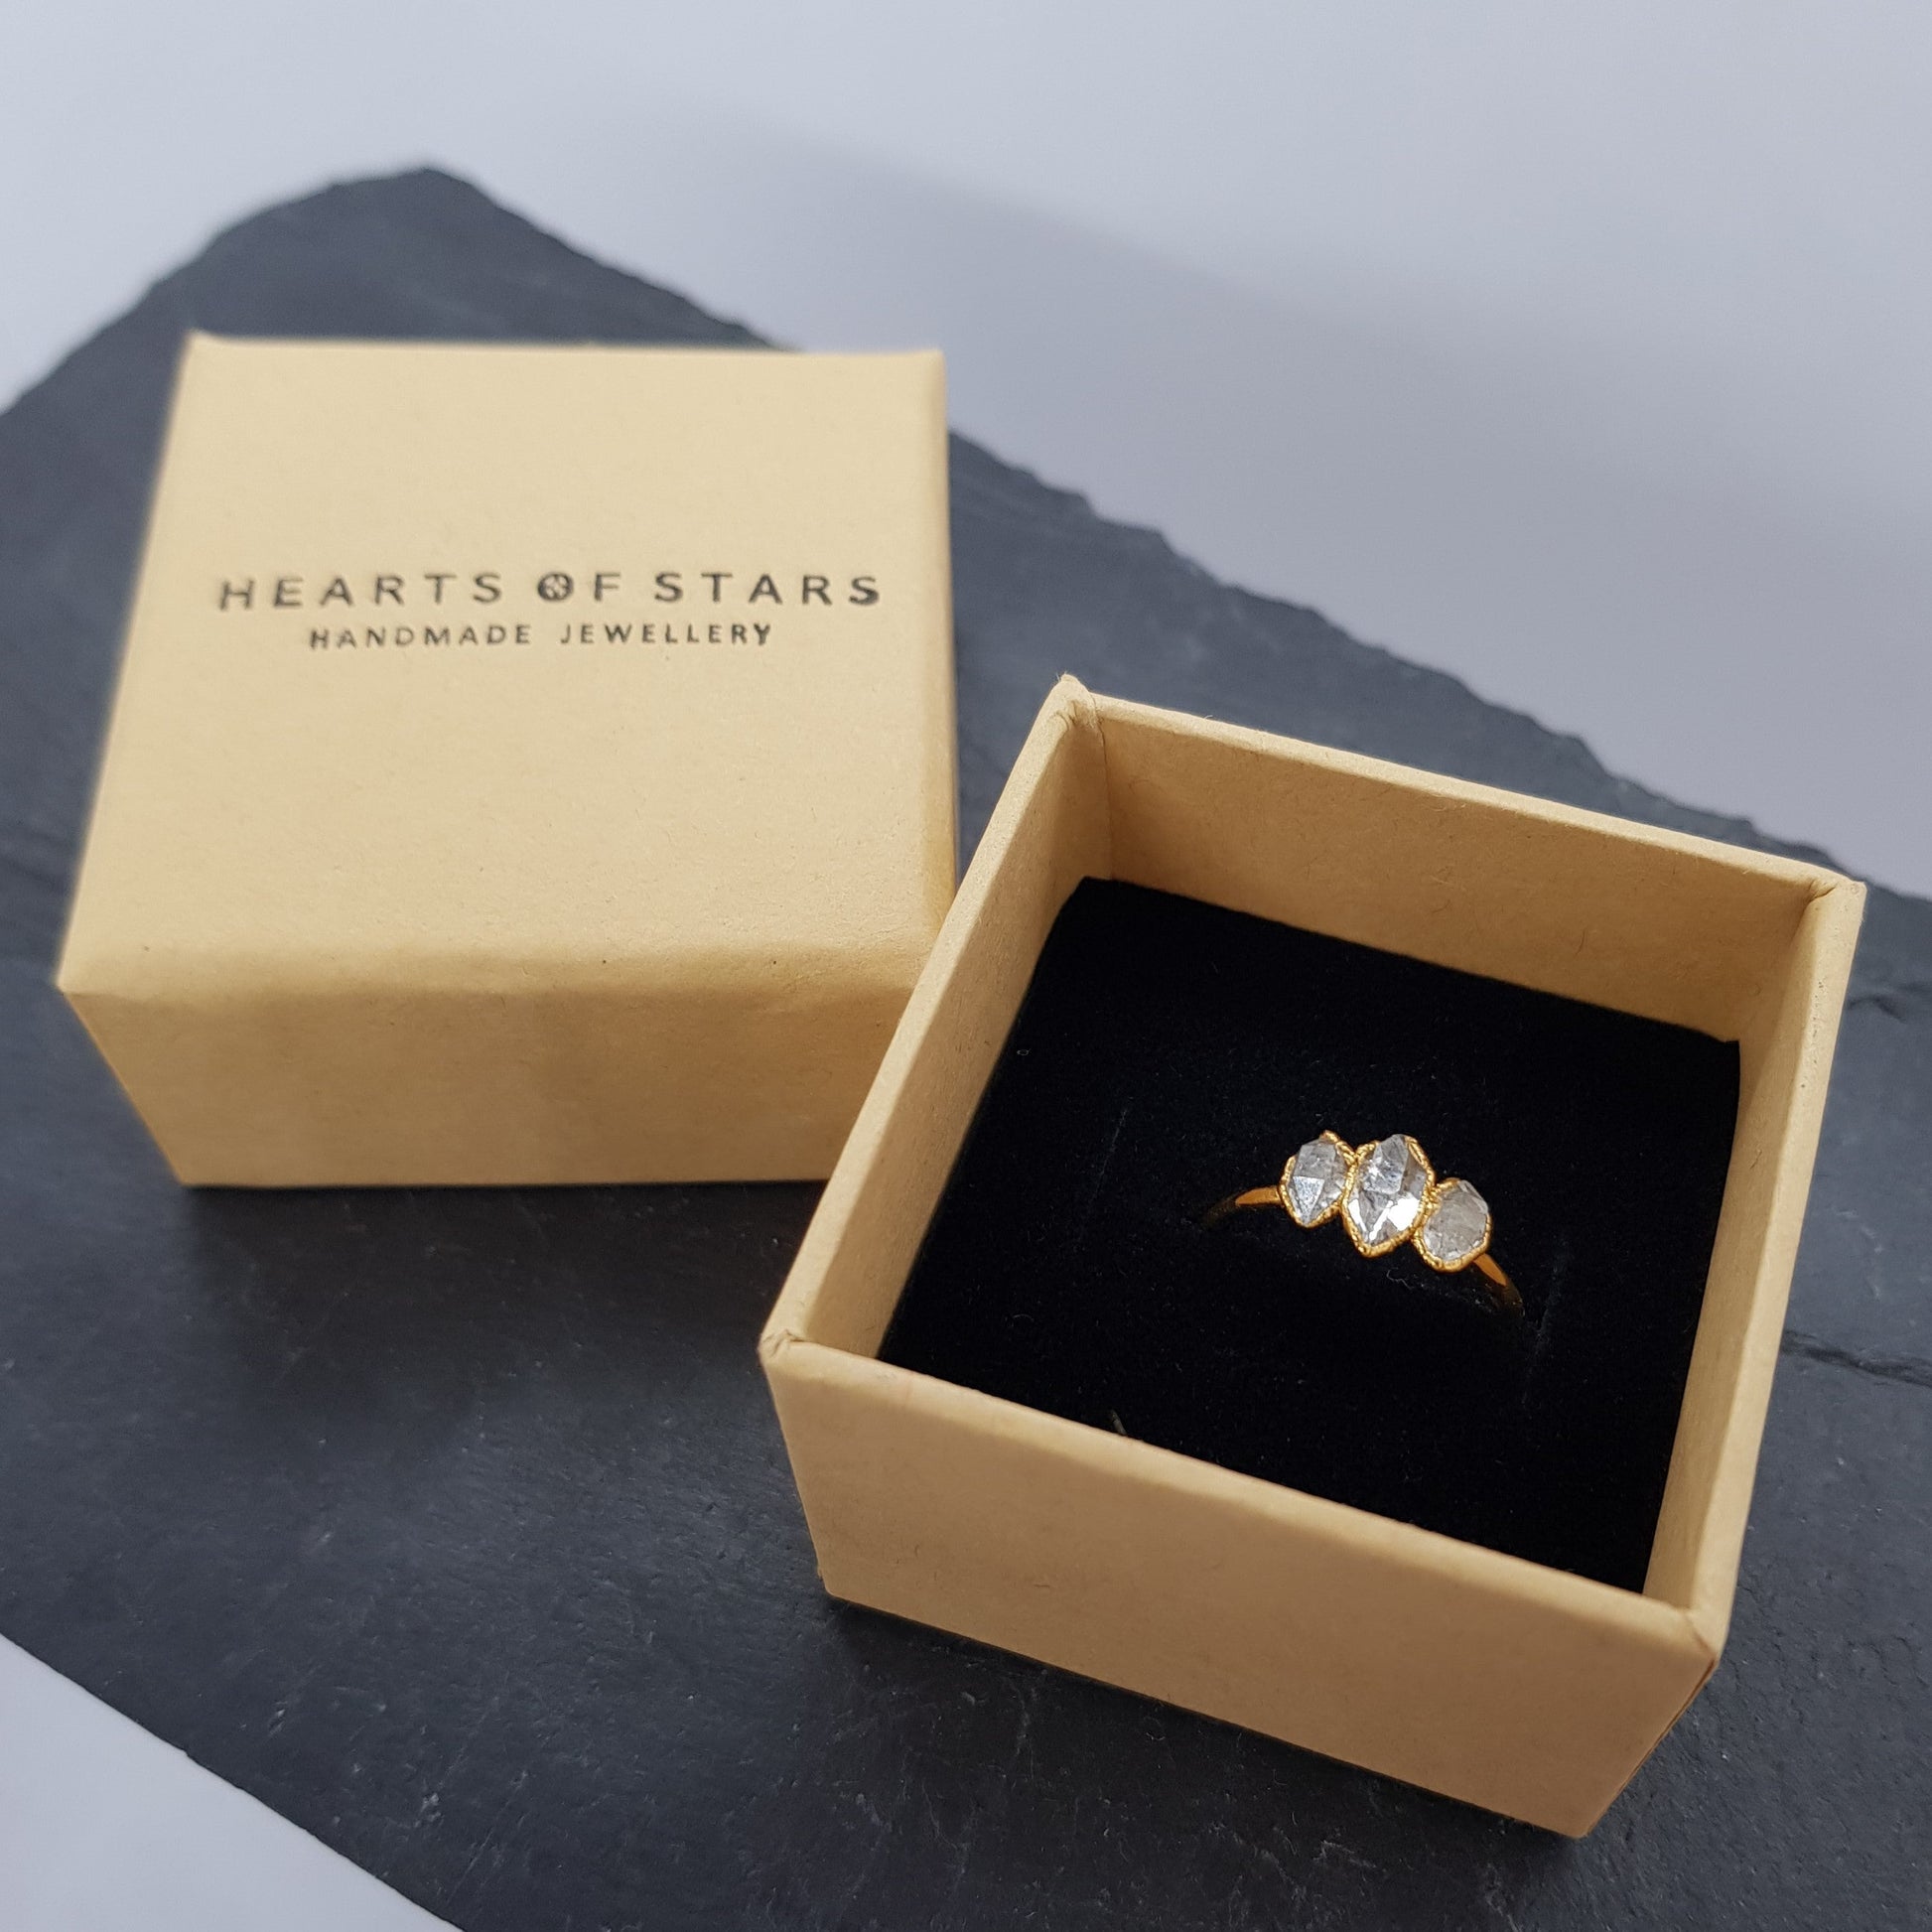 hearts of stars responsibly sourced jewellery ring box packaging showing triple Herkimer diamond ring